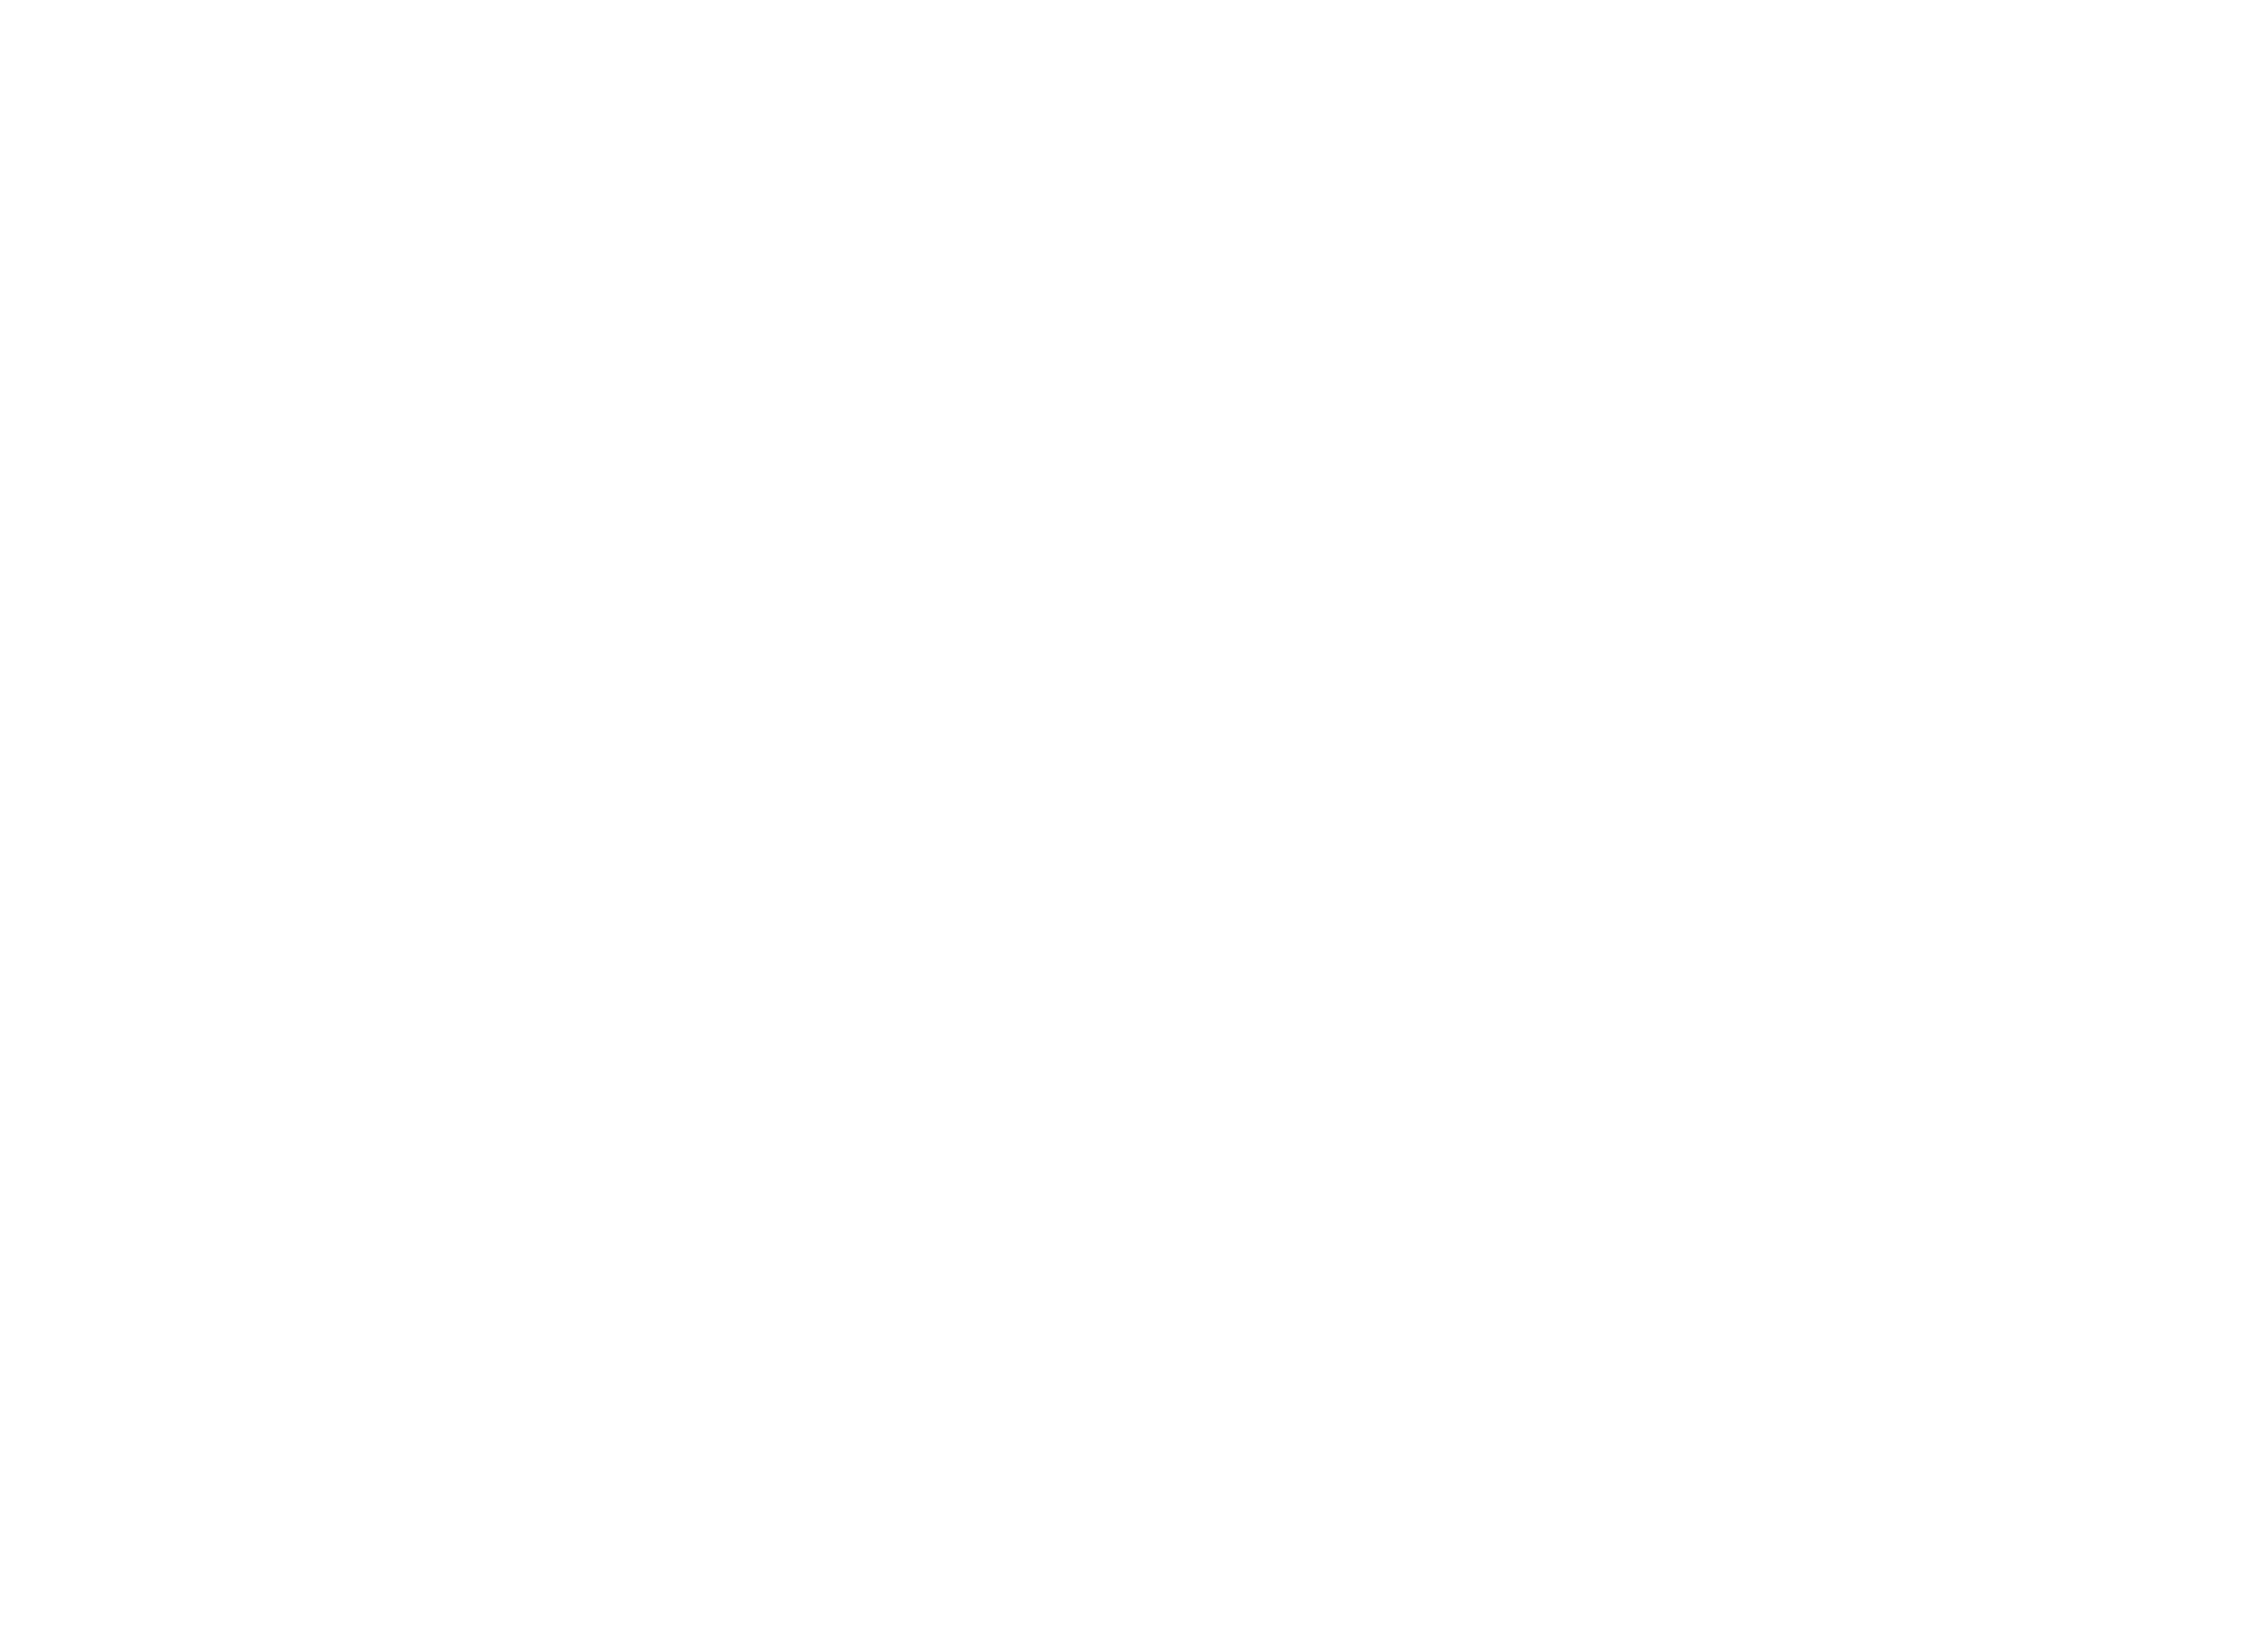 First Month of Unlimited Washing $9.99